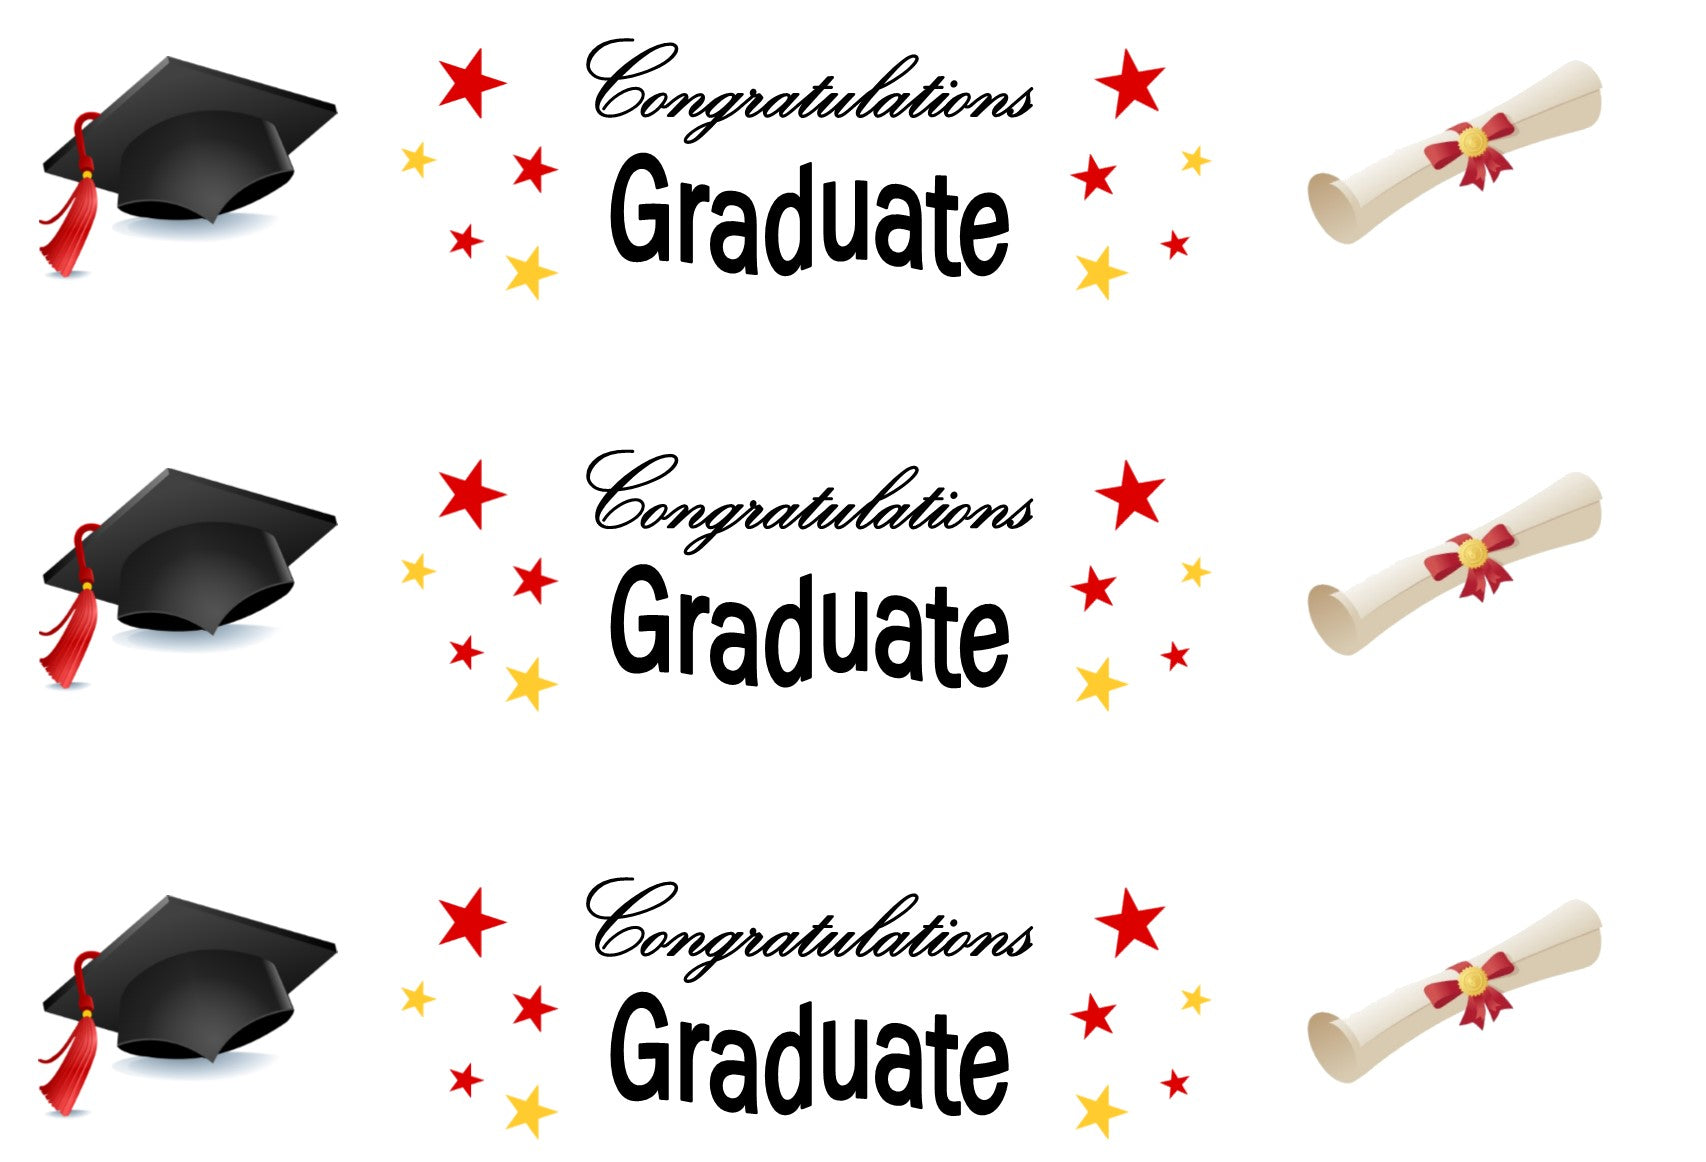 CONGRATULATIONS GRADUATE EDIBLE ICING CAKE RIBBON / SIDE STRIPS   Use instead of traditional ribbon to decorate the sides of your cakes  Edible fondant icing, perfect for that special occasion